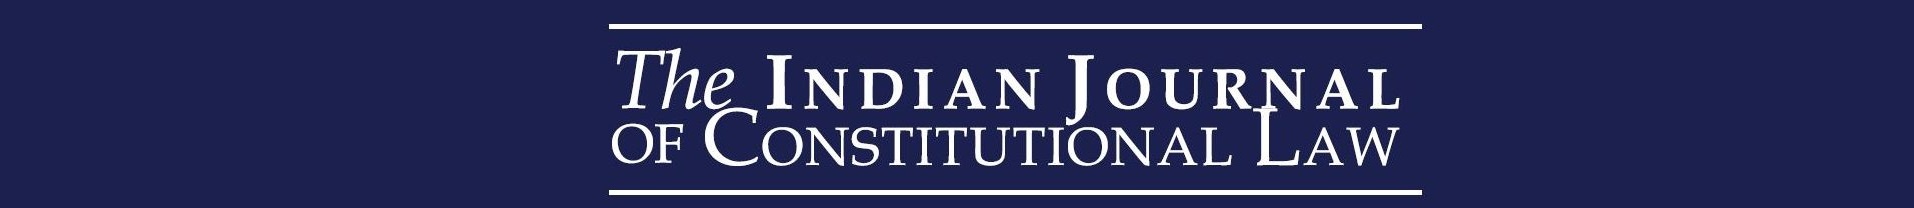 The Indian Journal of Constitutional Law